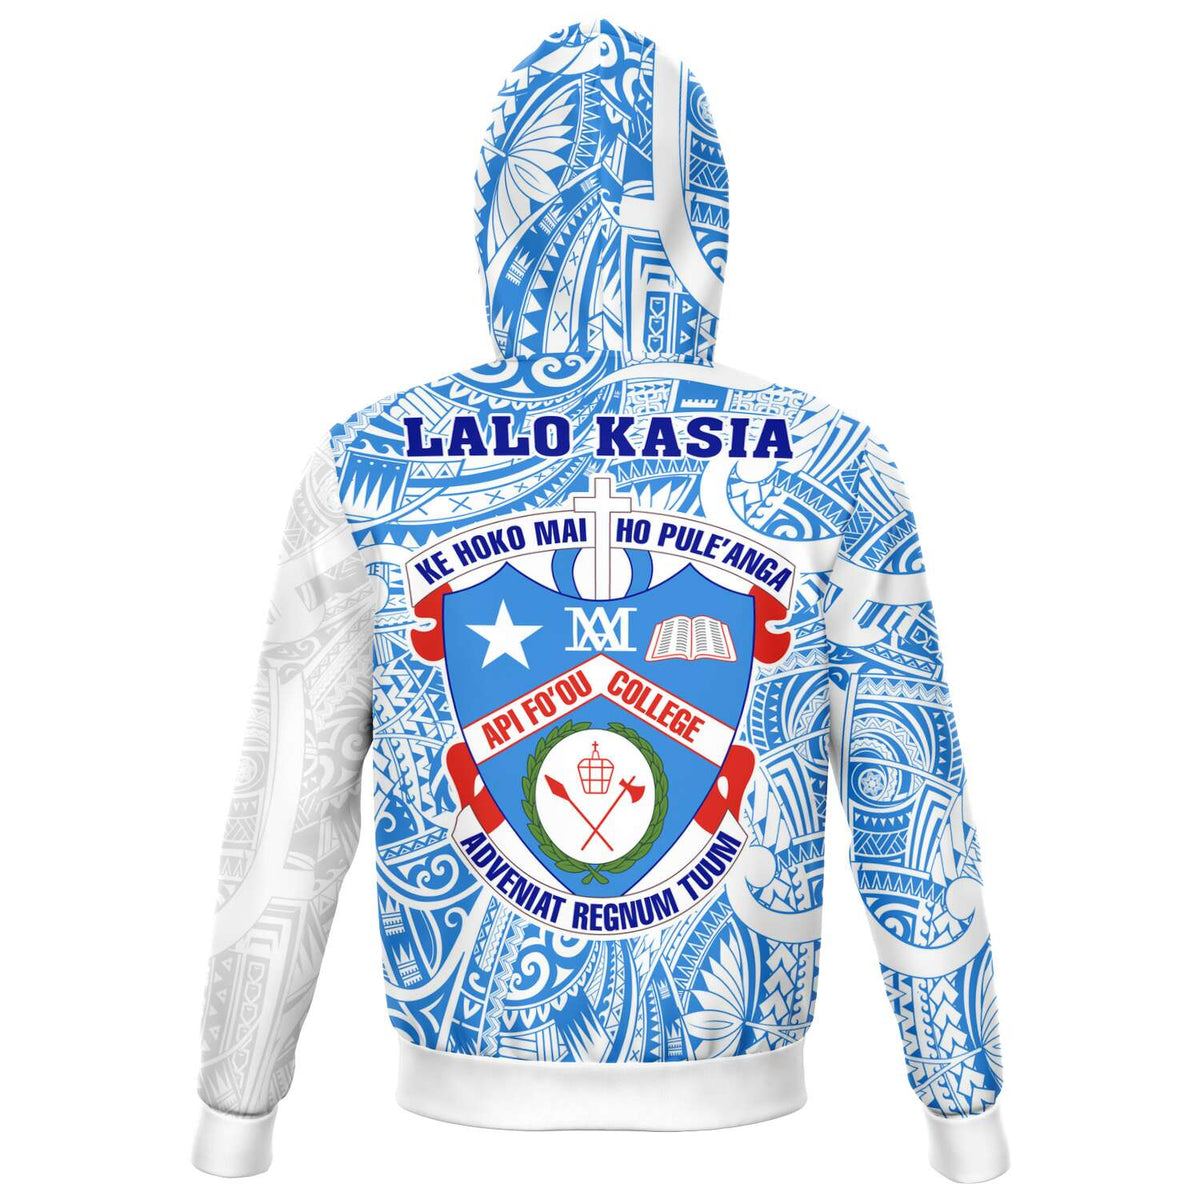 Custom Hoodies - We can print your Own design or we design it for you –  Atikapu